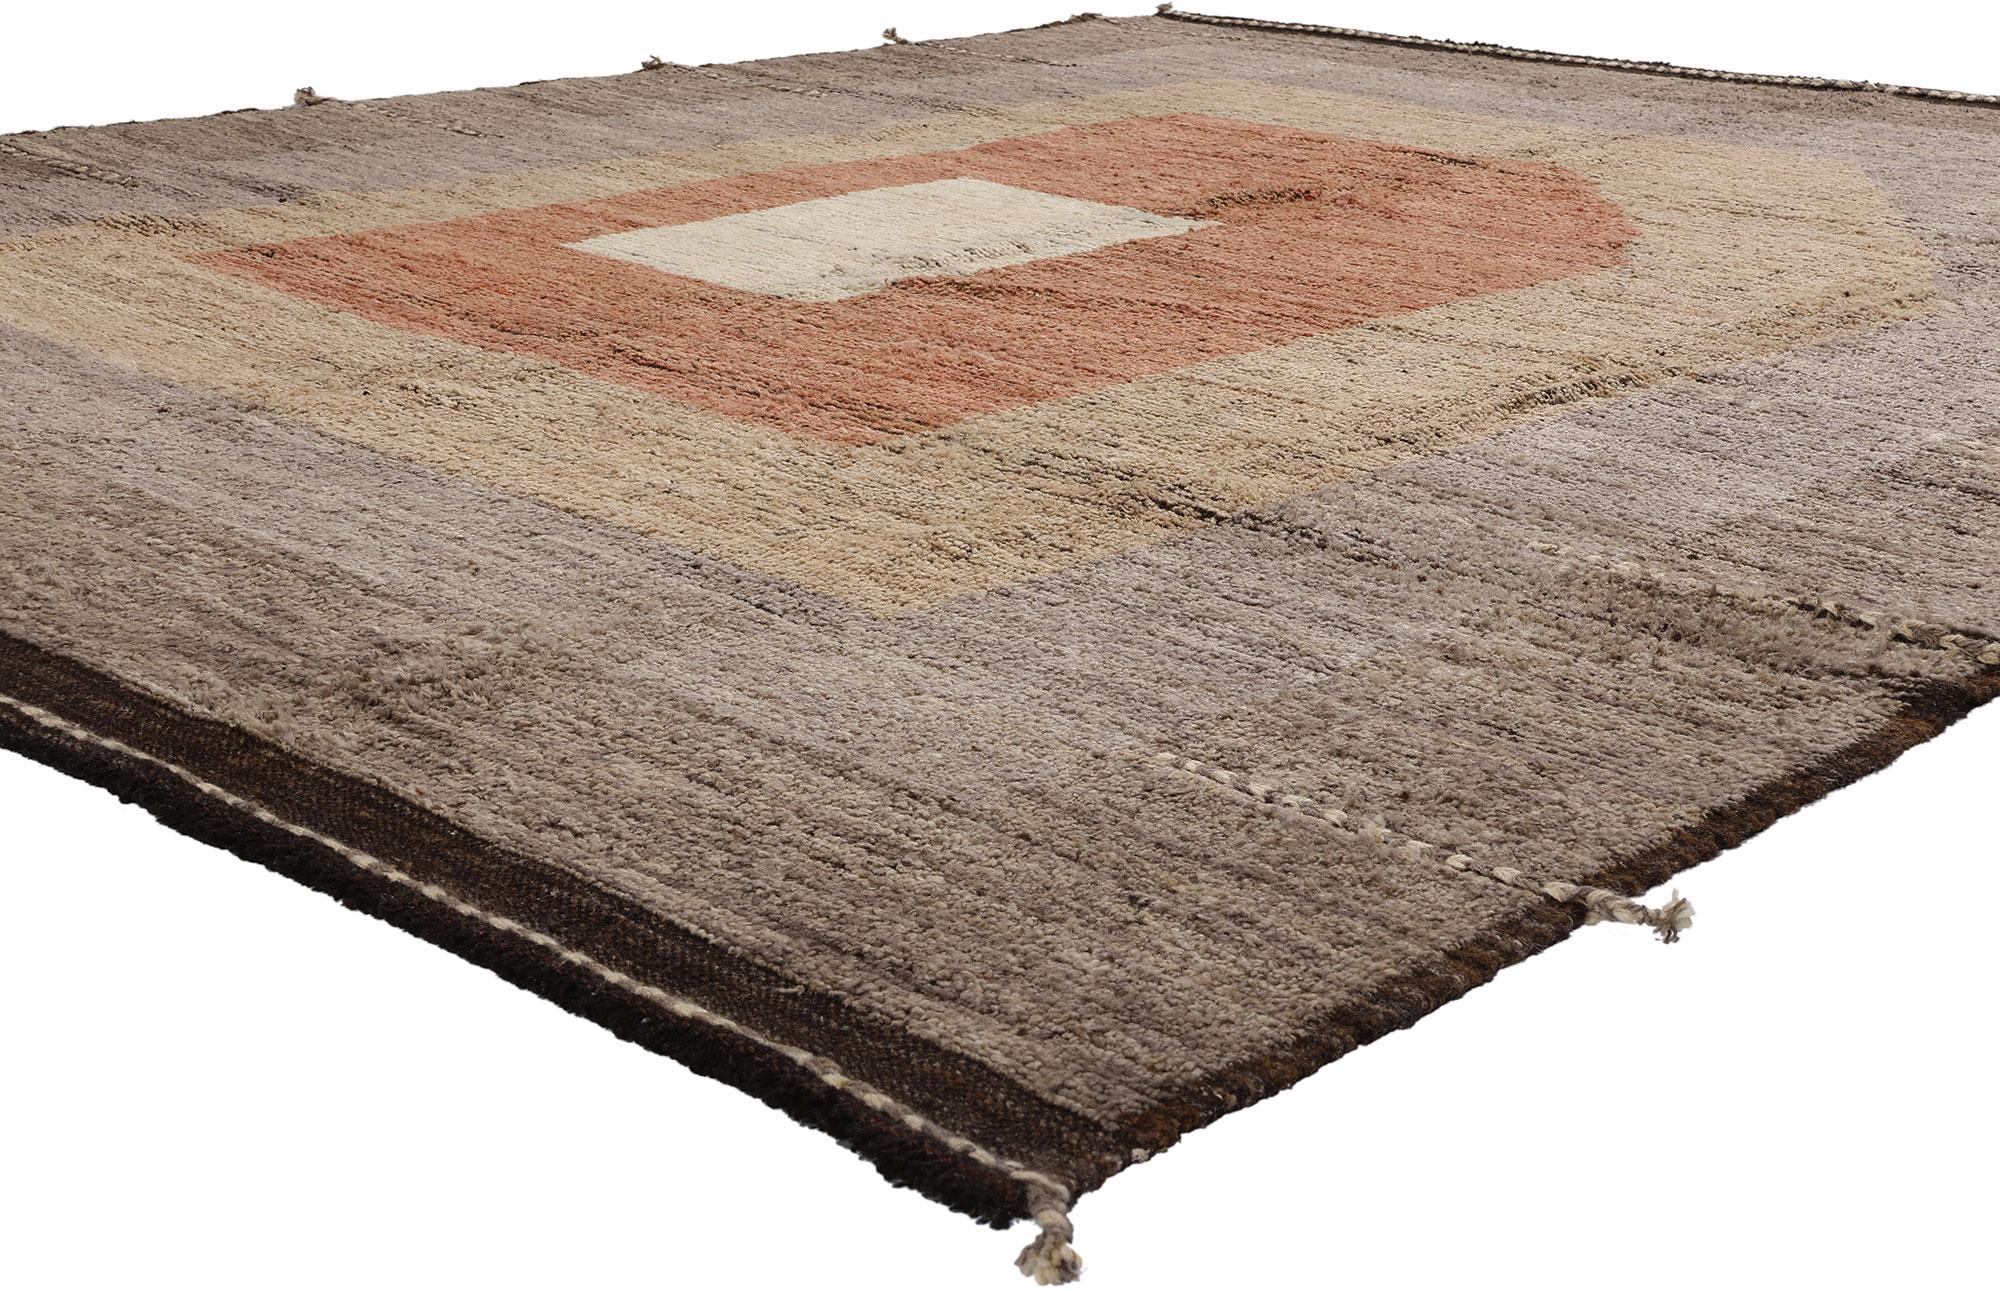 81062 Midcentury Modern Moroccan Japandi Rug, 08'06 x 10'02. Immerse yourself in the captivating fusion of Midcentury Modern style, the serene allure of Japandi design, and a dash of Boho Chic in this hand-knotted wool Moroccan rug. Each intricately